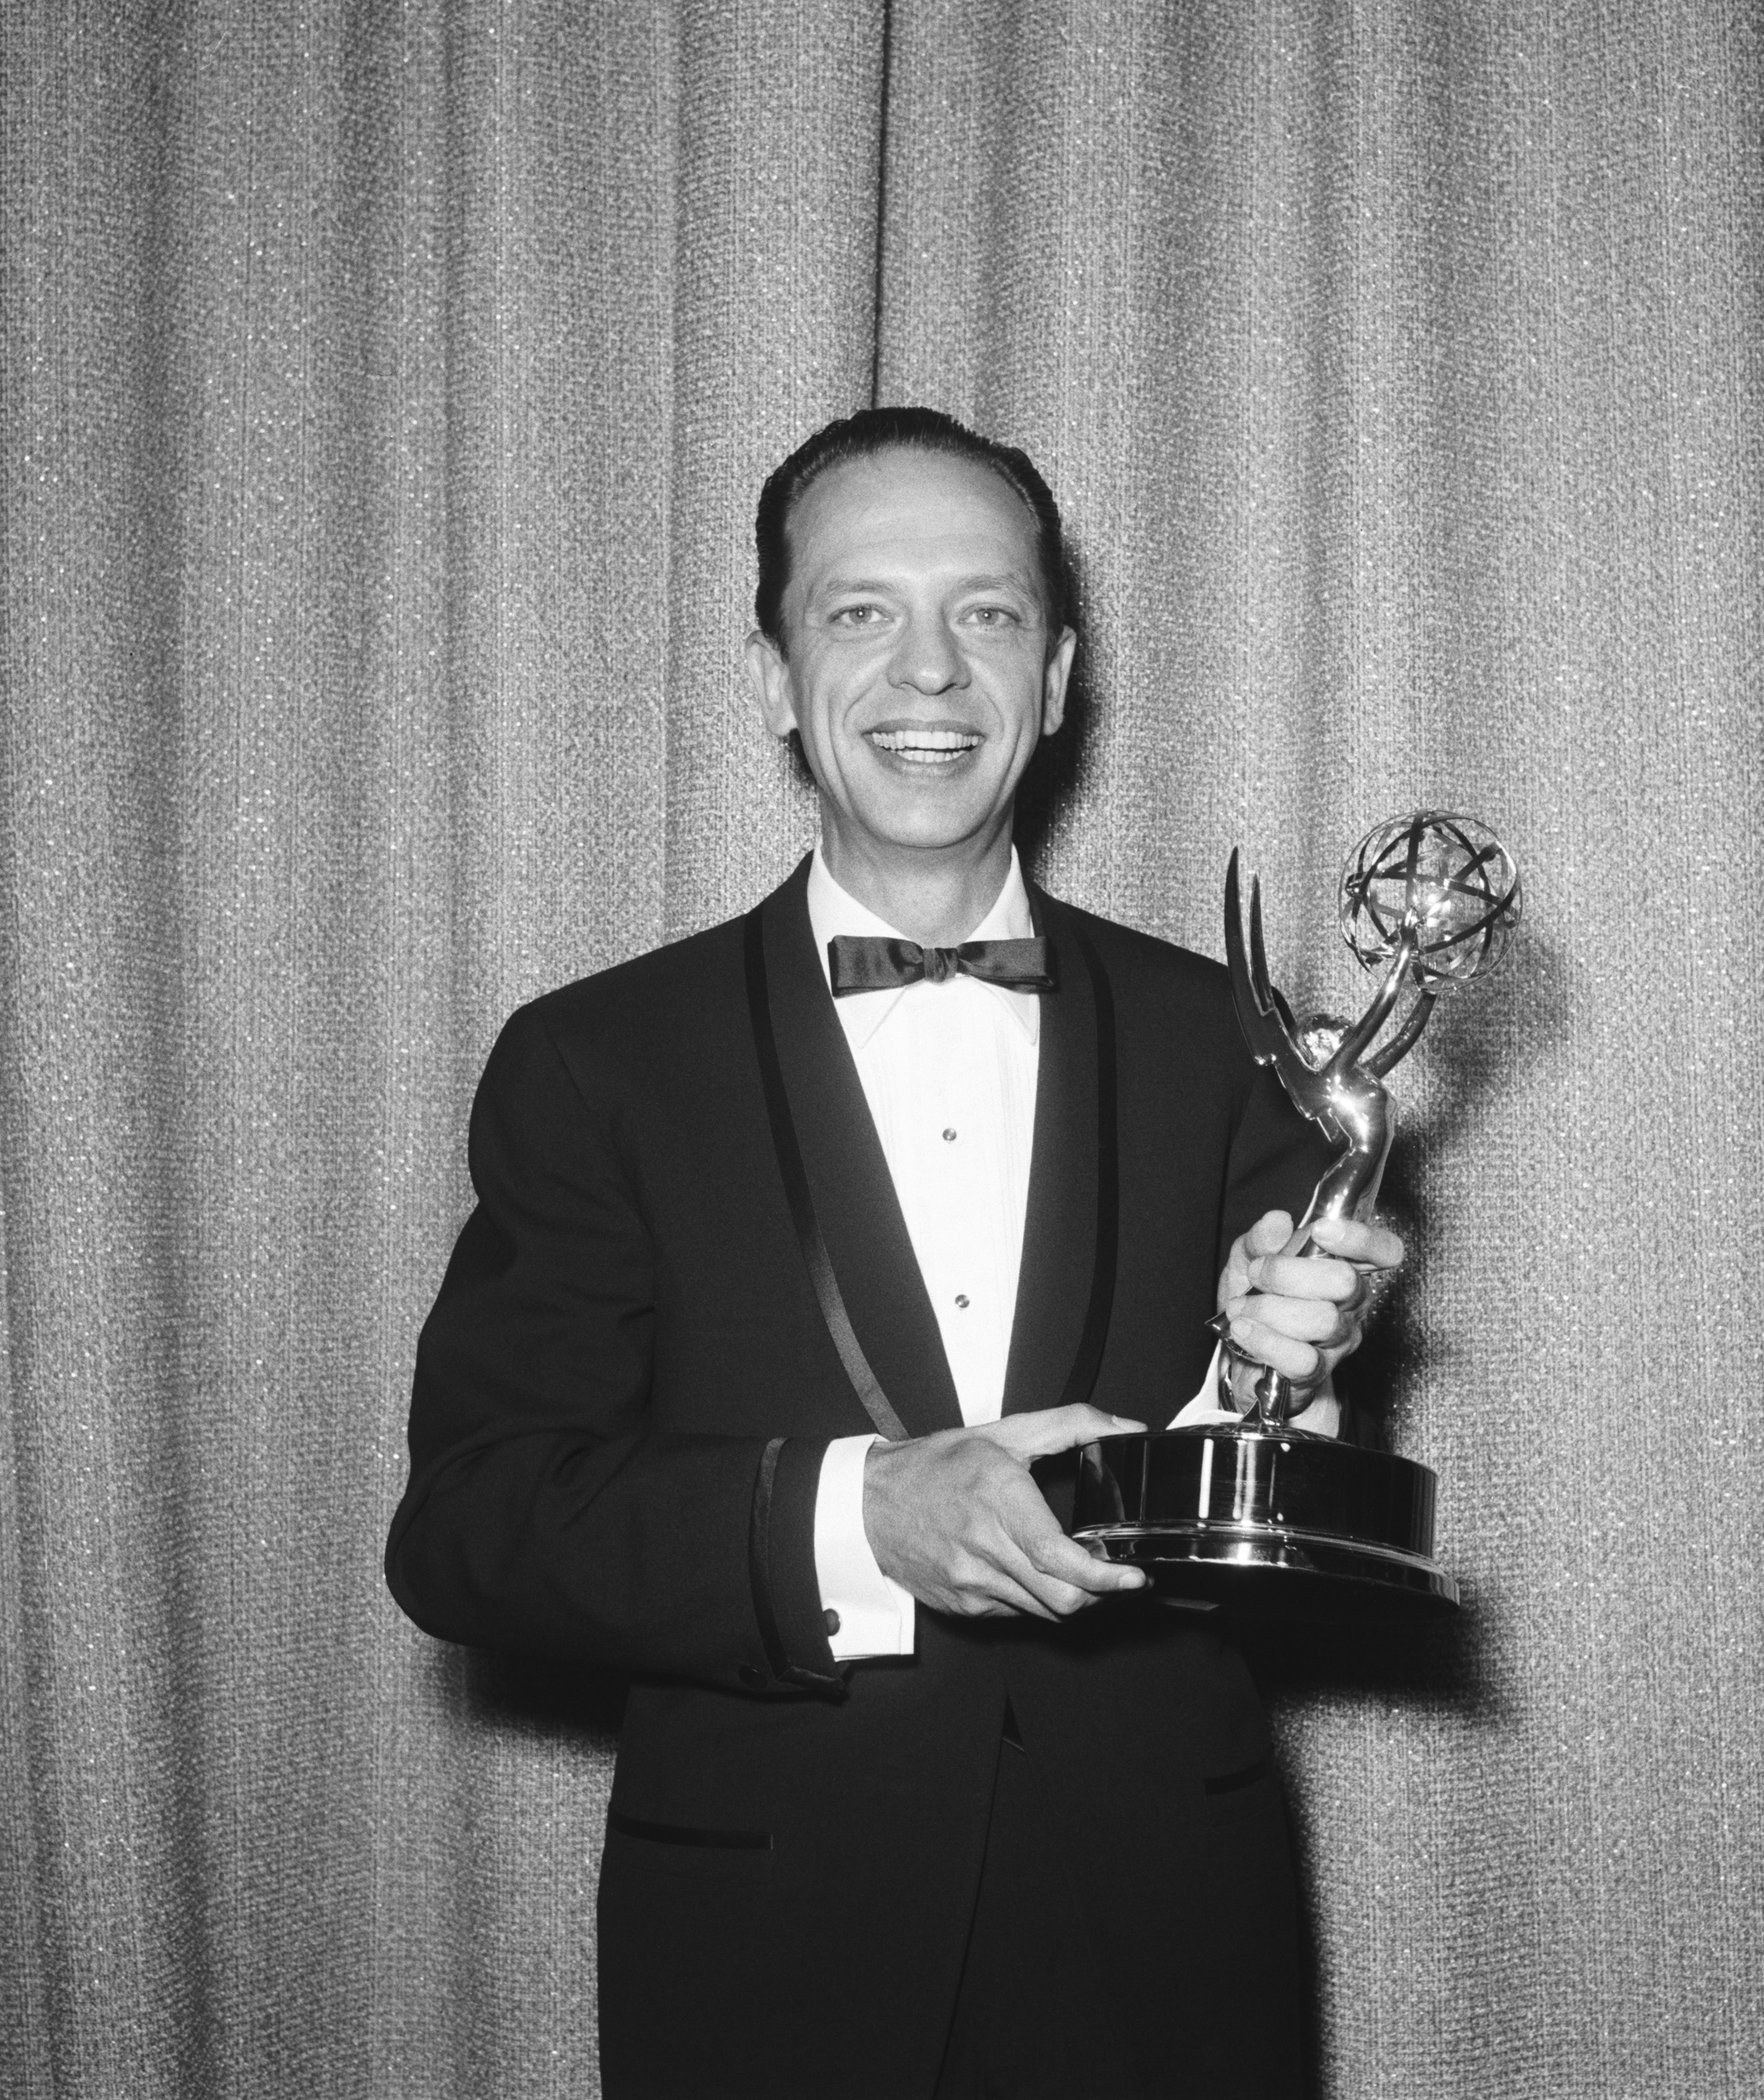 Actor Don Knotts with his Emmy trophy at the 15th Annual Primetime Emmy Awards. (NBC—NBC via Getty Images)